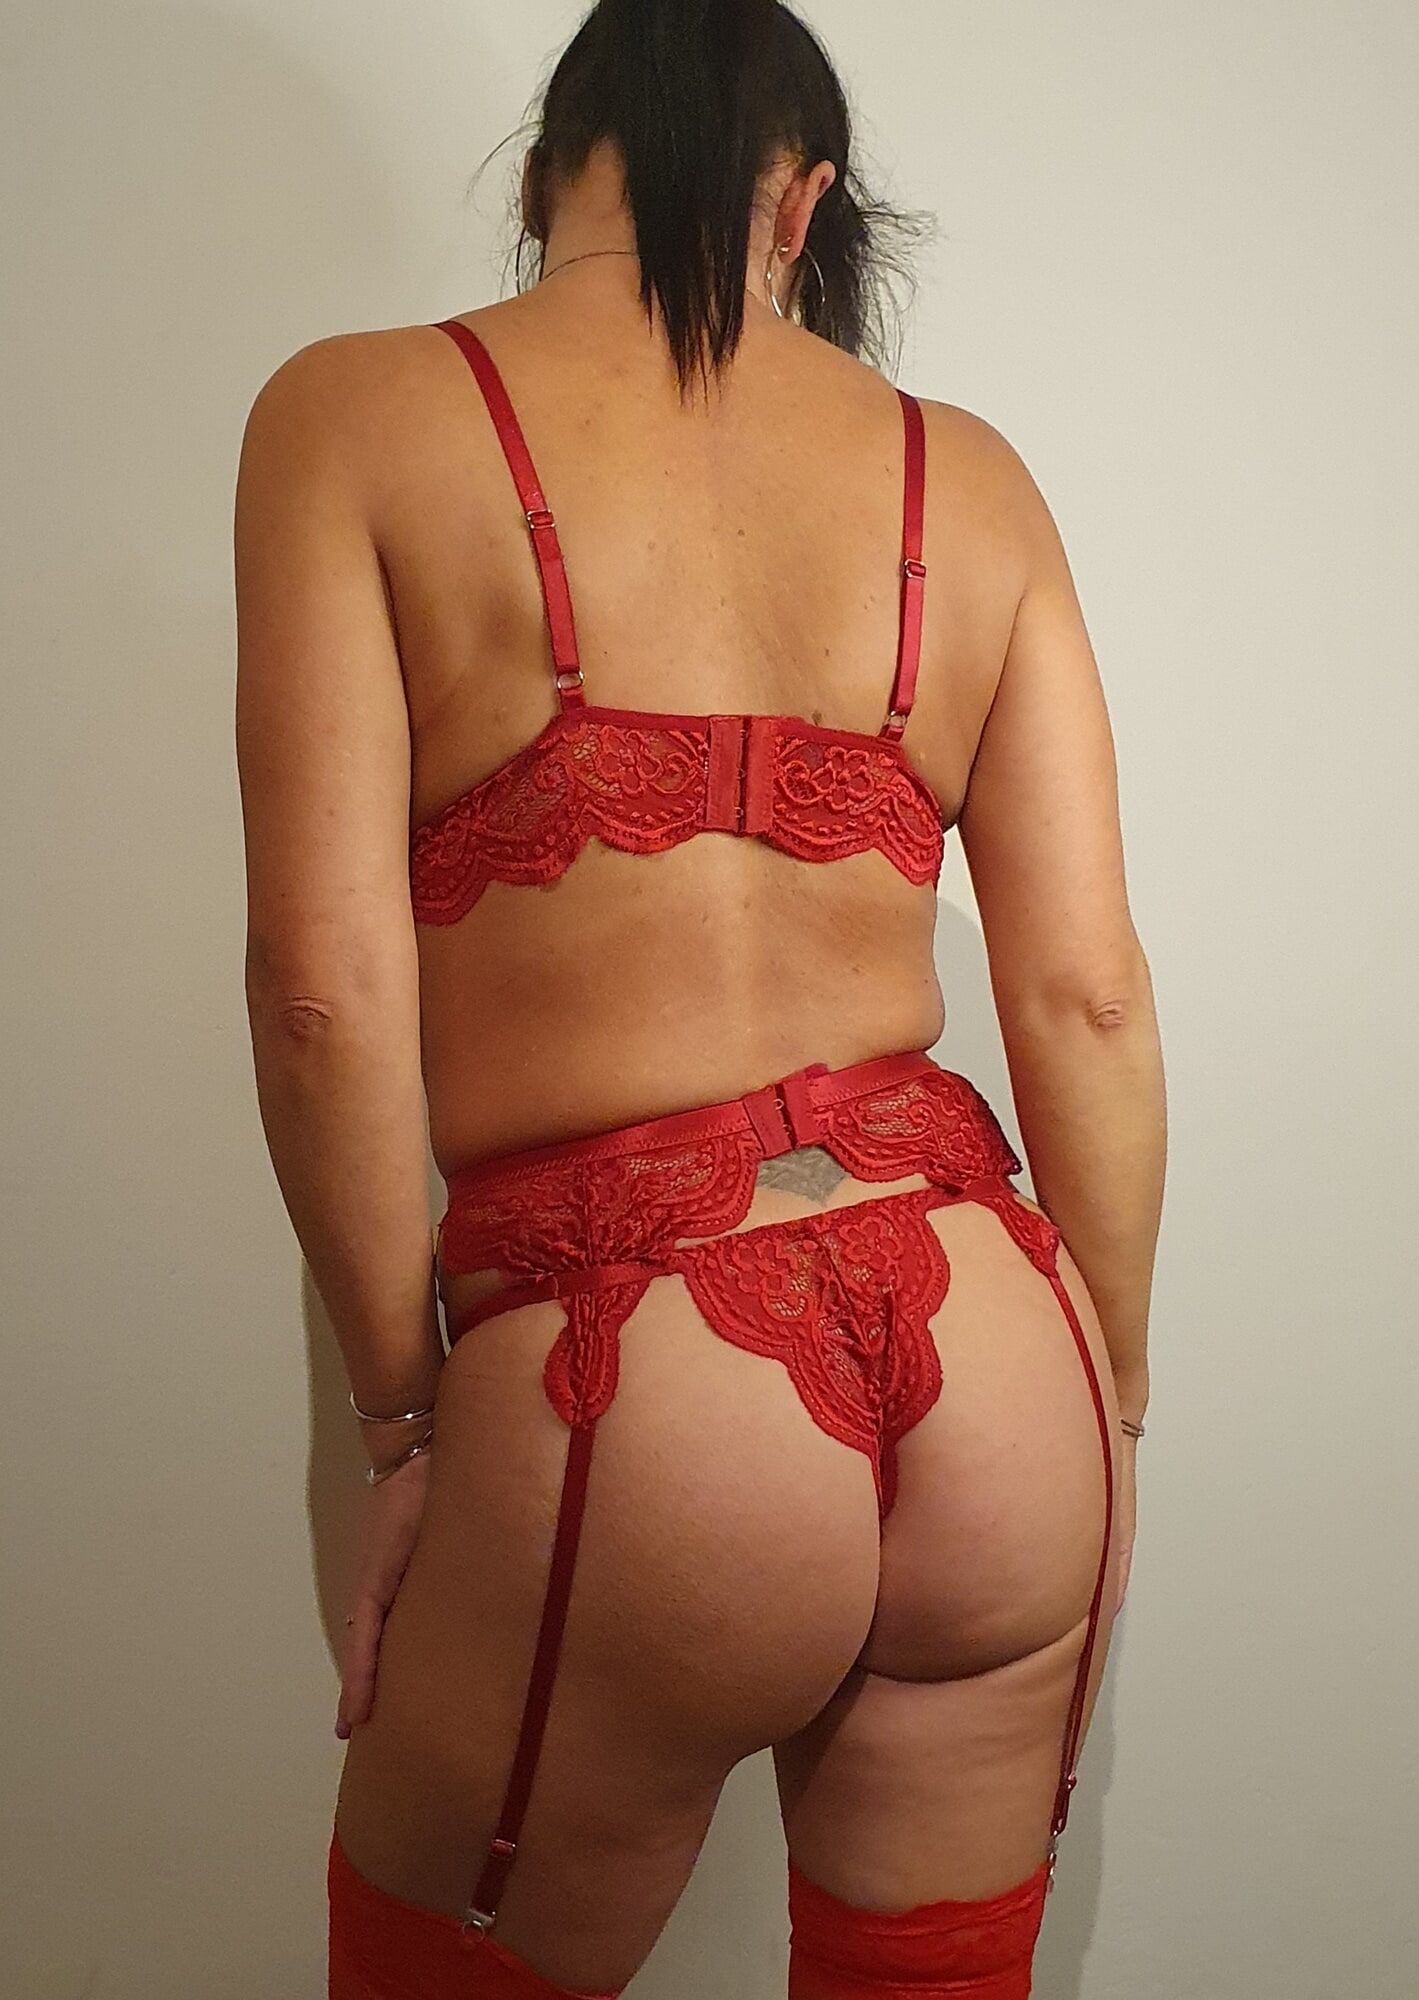 Lady in red lingerie part two #6